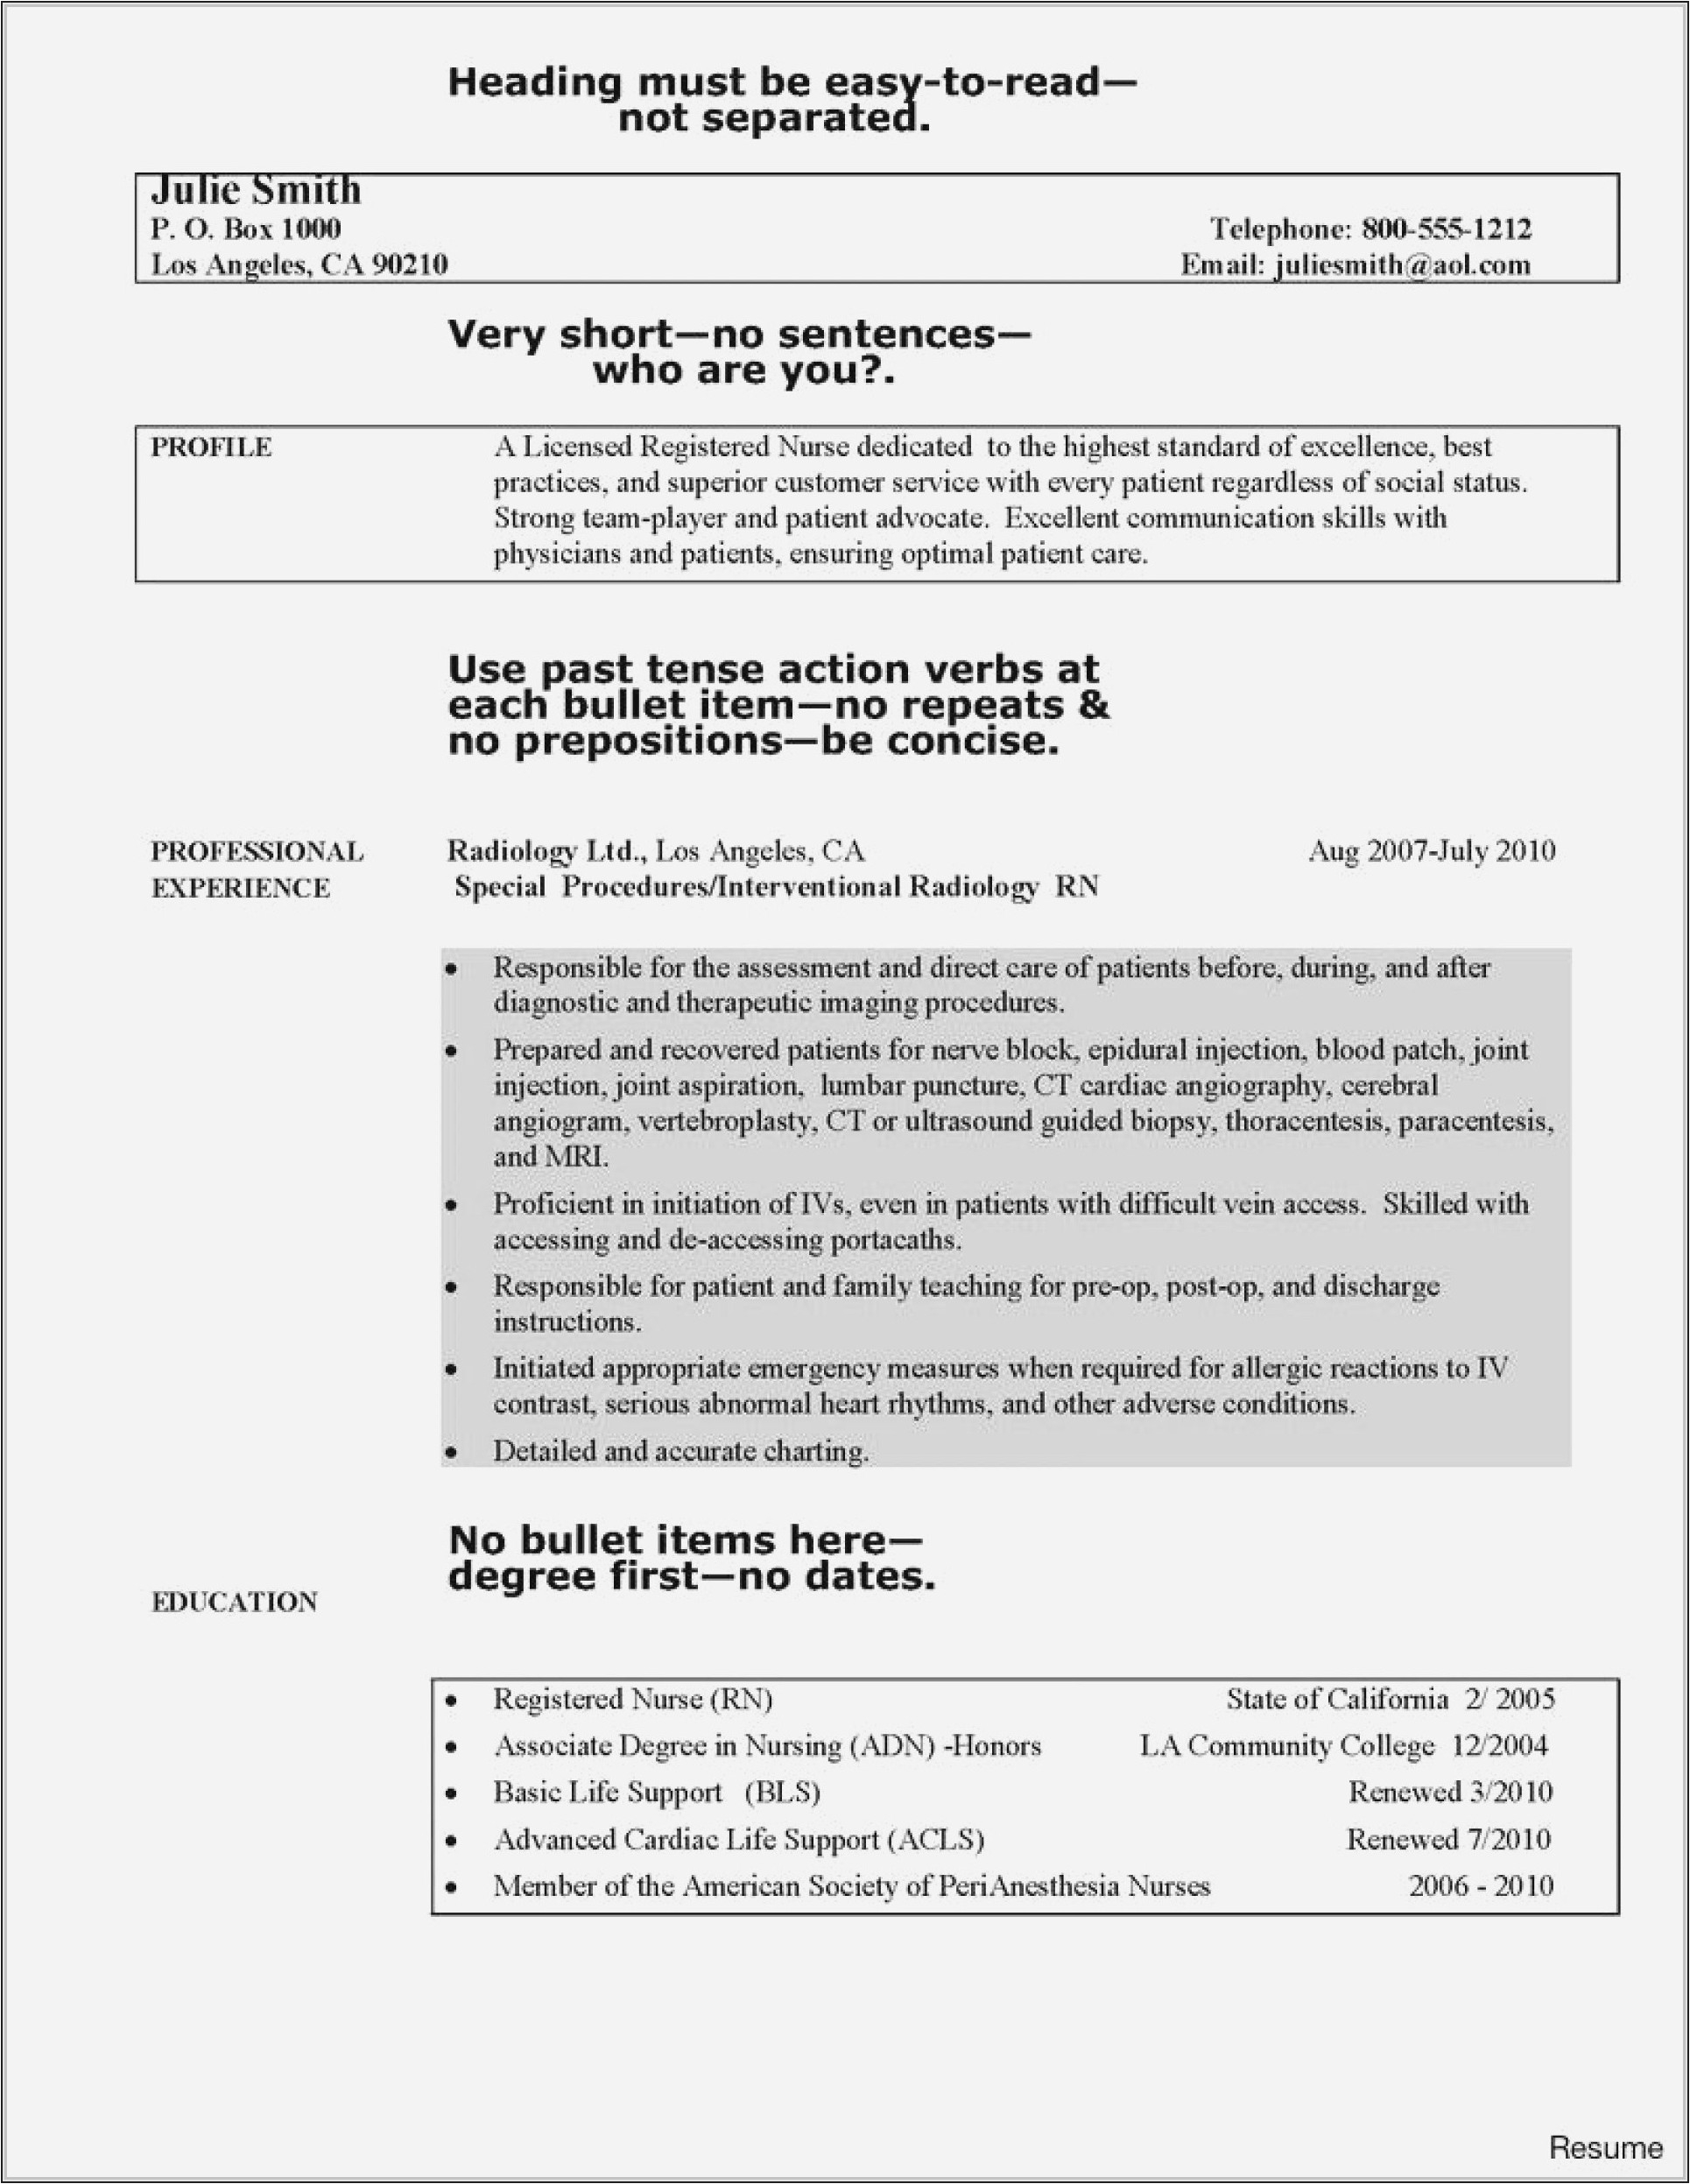 Sample Resume Cna No Previous Experience Resume Sample for Cna with No Experience Uncategorized